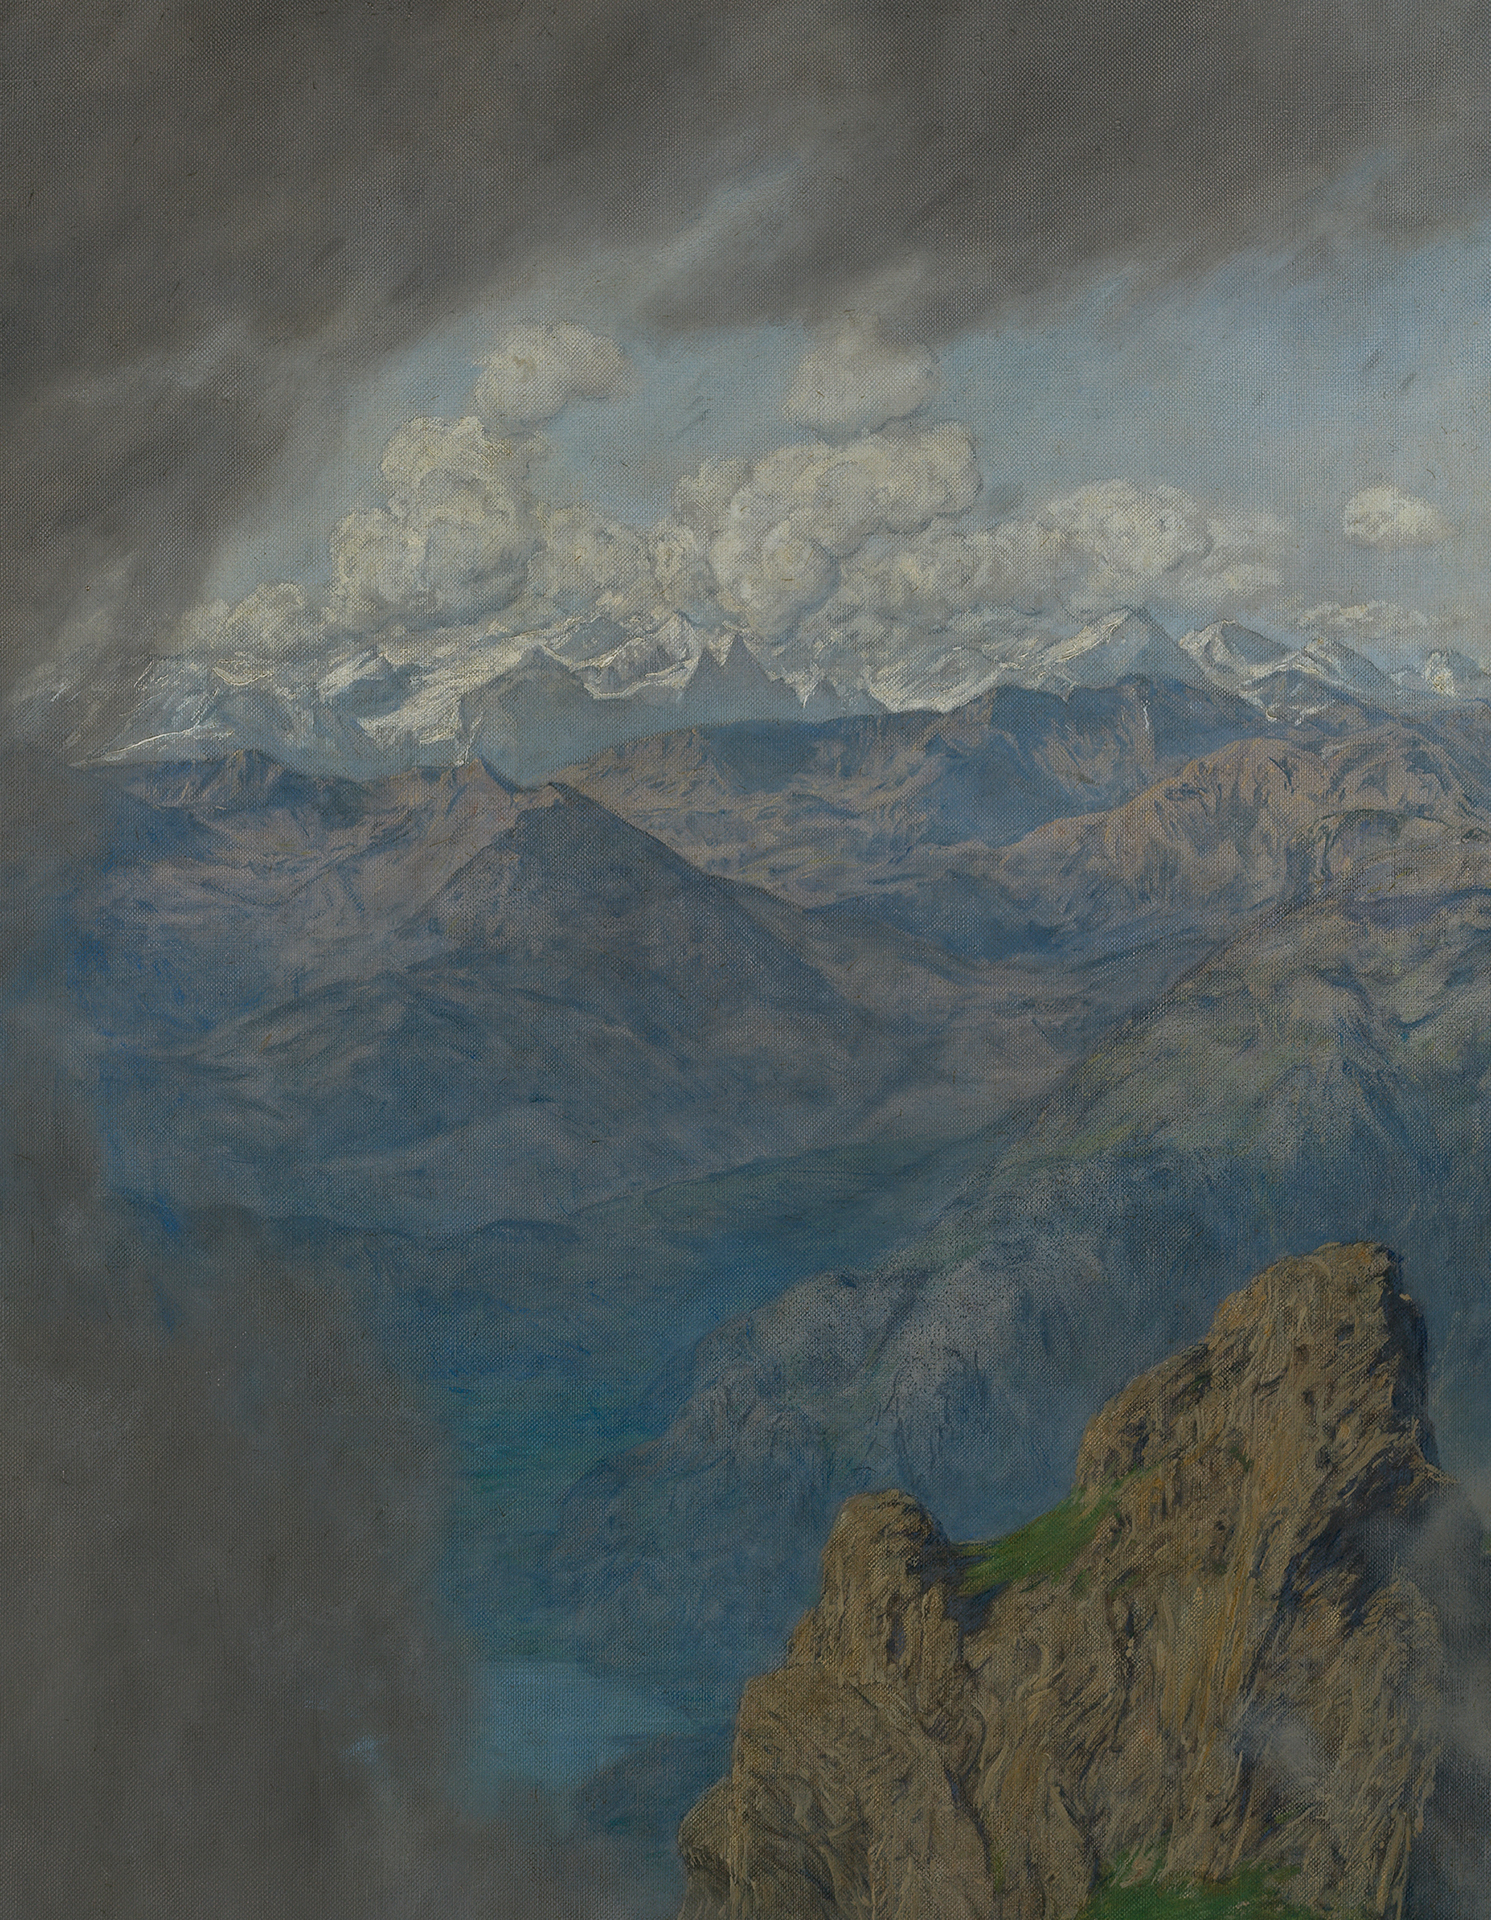 Detail from Hans Thomas' painting View from Pilatus: behind a brightly lit mountain peak and a waft of mist in the middle ground, a broad mountain landscape stretches in cool tones.